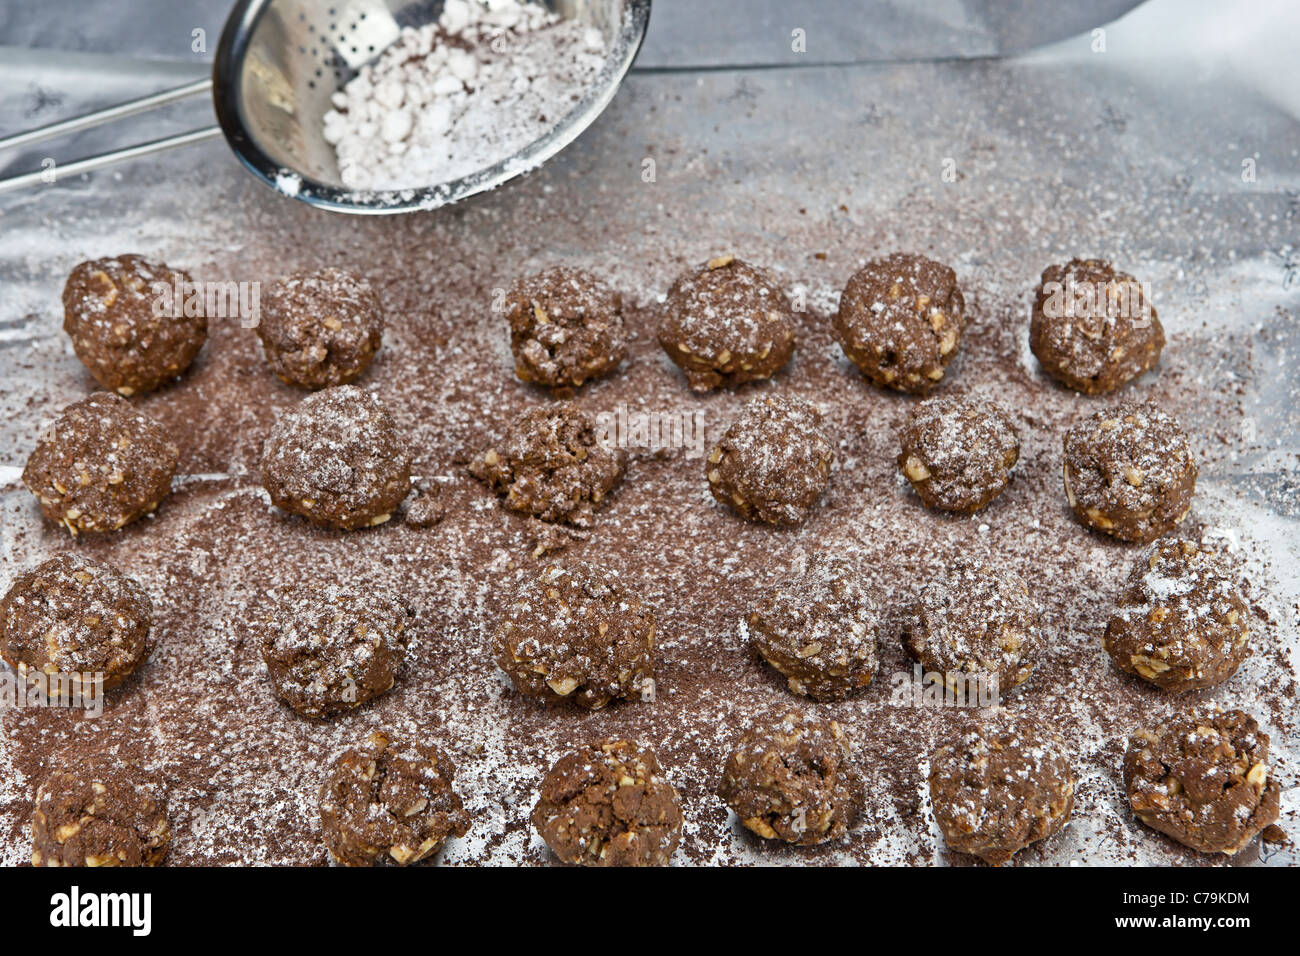 The finished balls are dusted with icing sugar and cocoa powder. Stock Photo